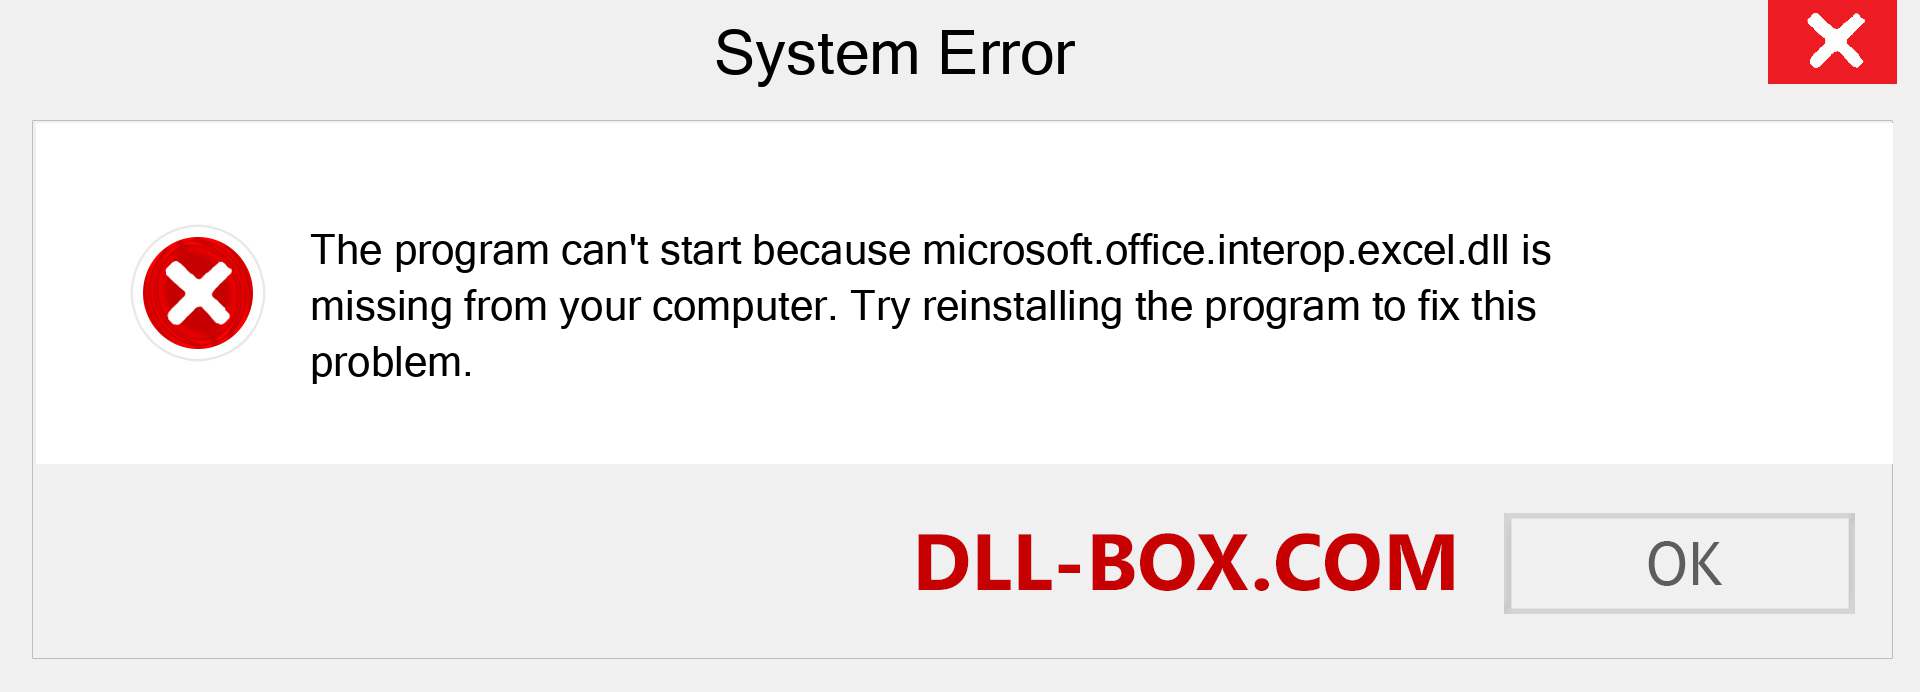  microsoft.office.interop.excel.dll file is missing?. Download for Windows 7, 8, 10 - Fix  microsoft.office.interop.excel dll Missing Error on Windows, photos, images